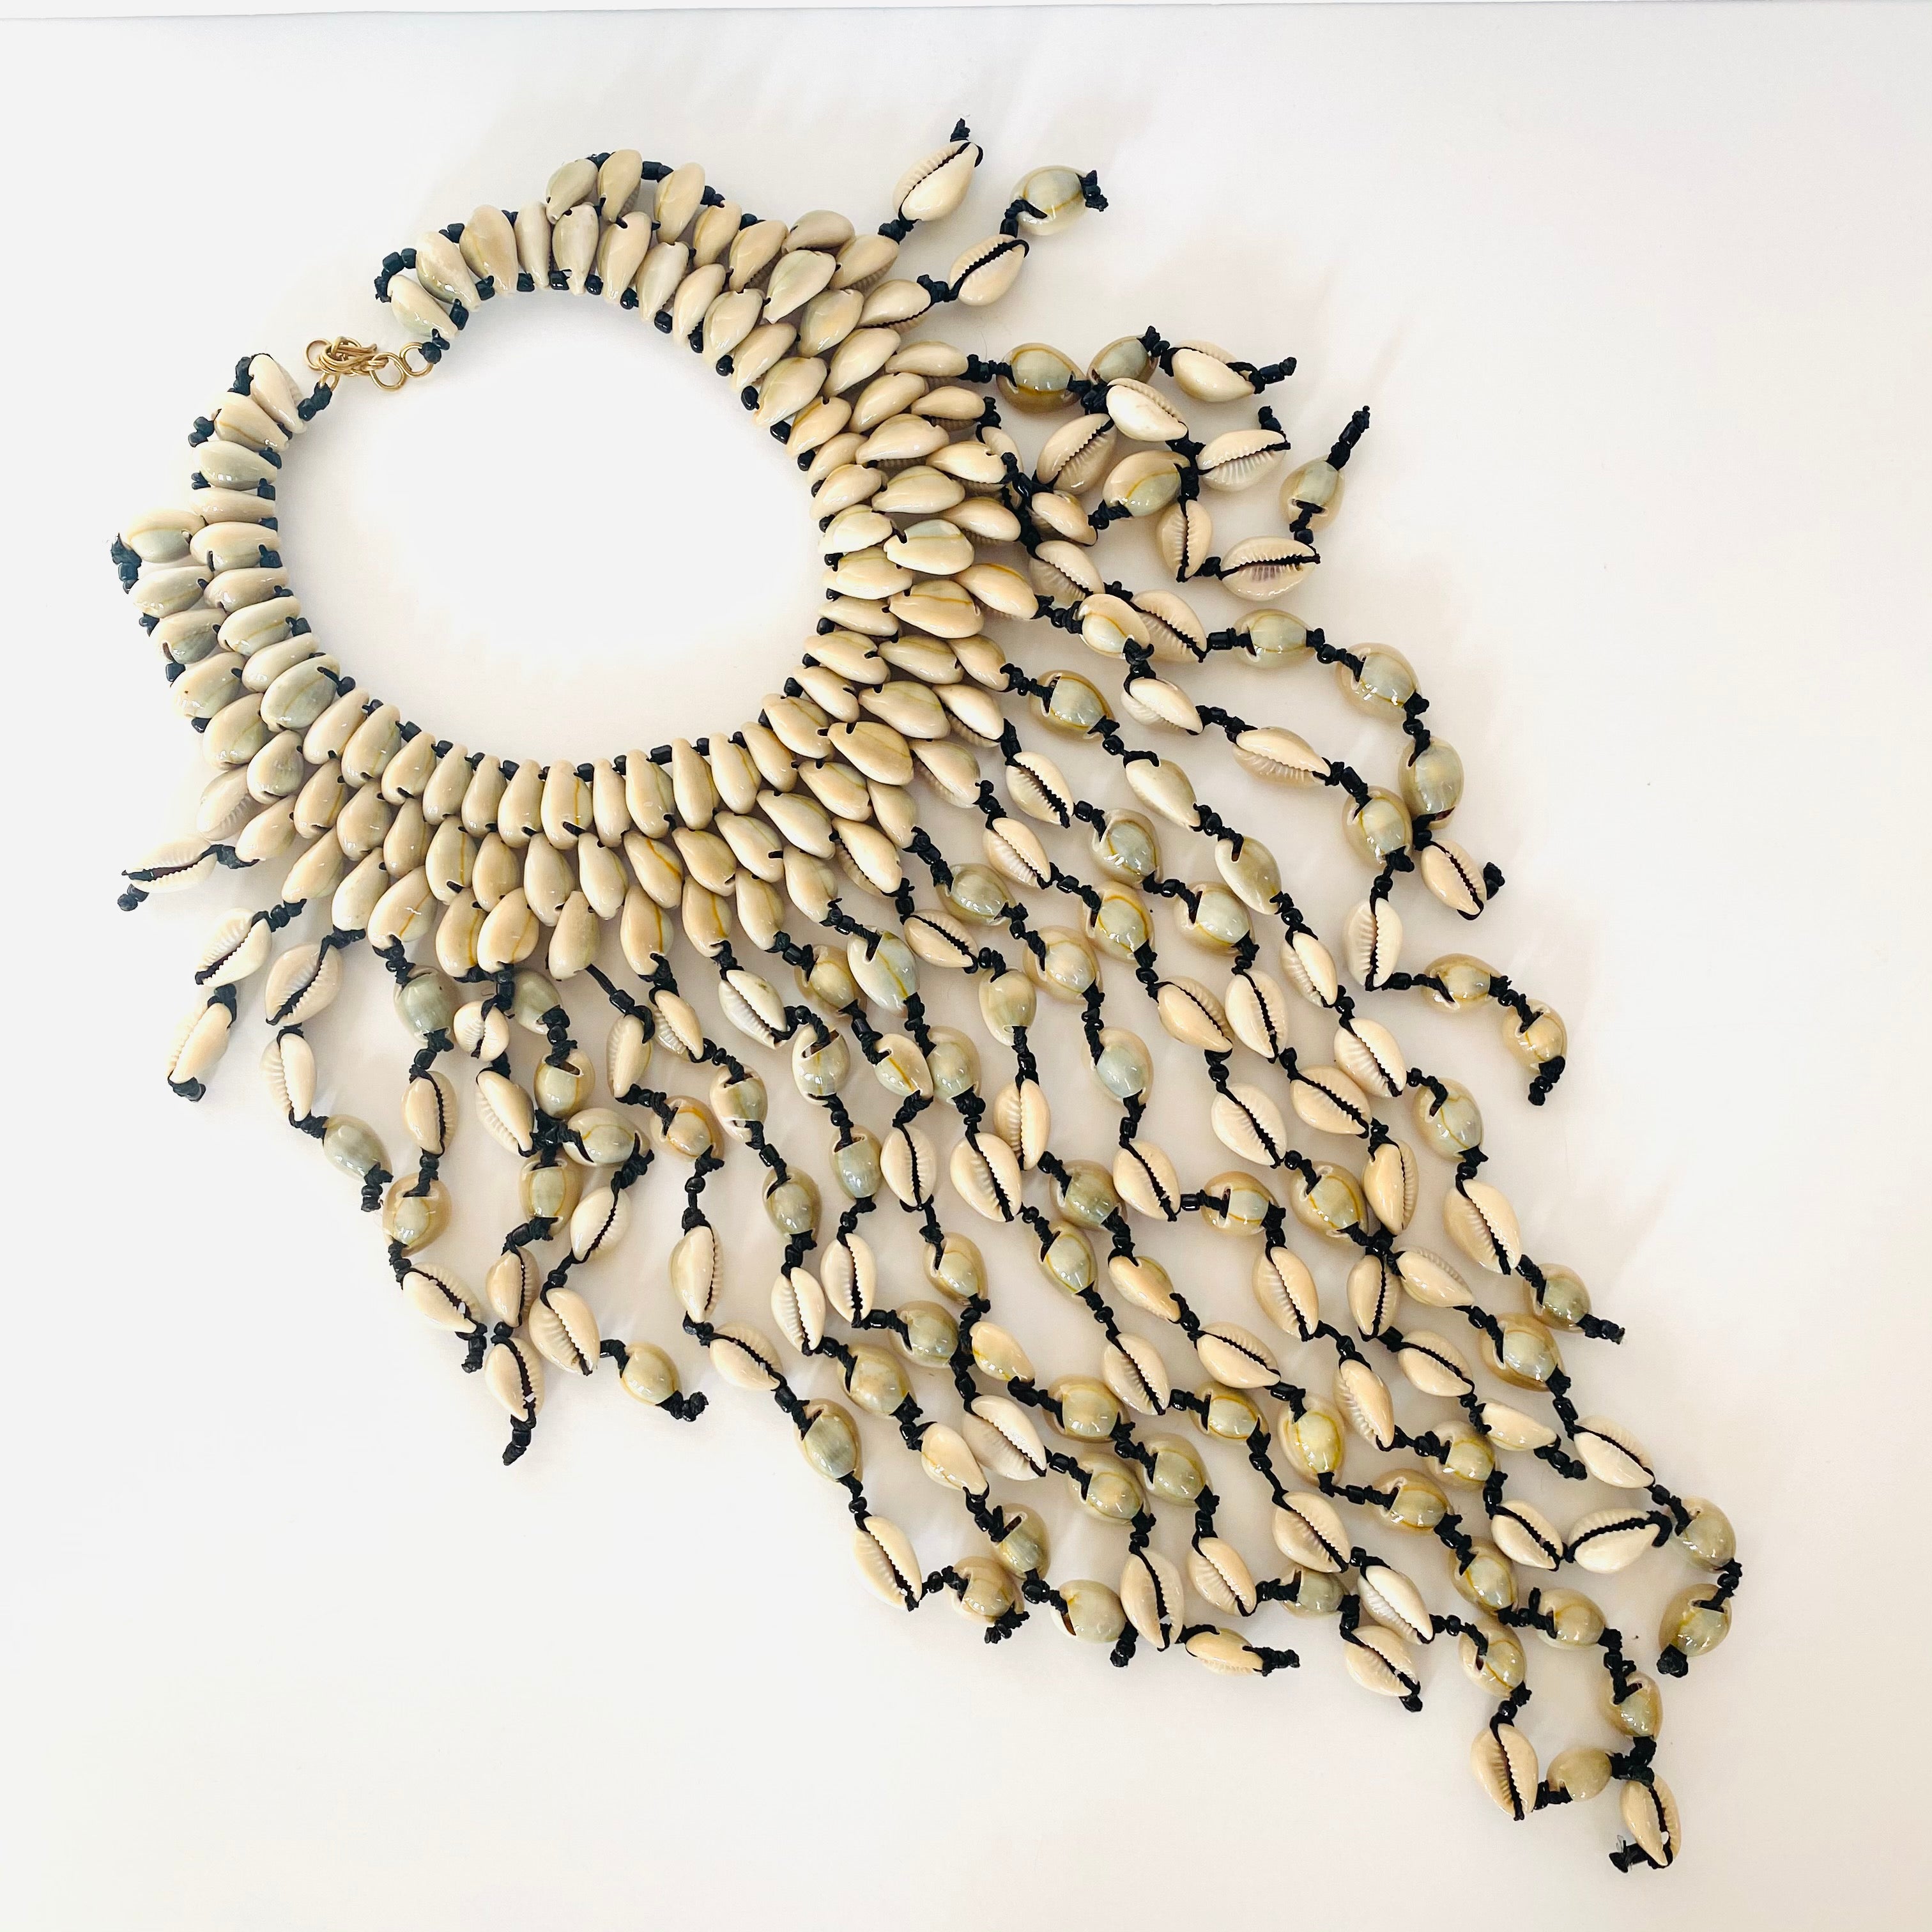 The Kwavi Cowrie Necklace